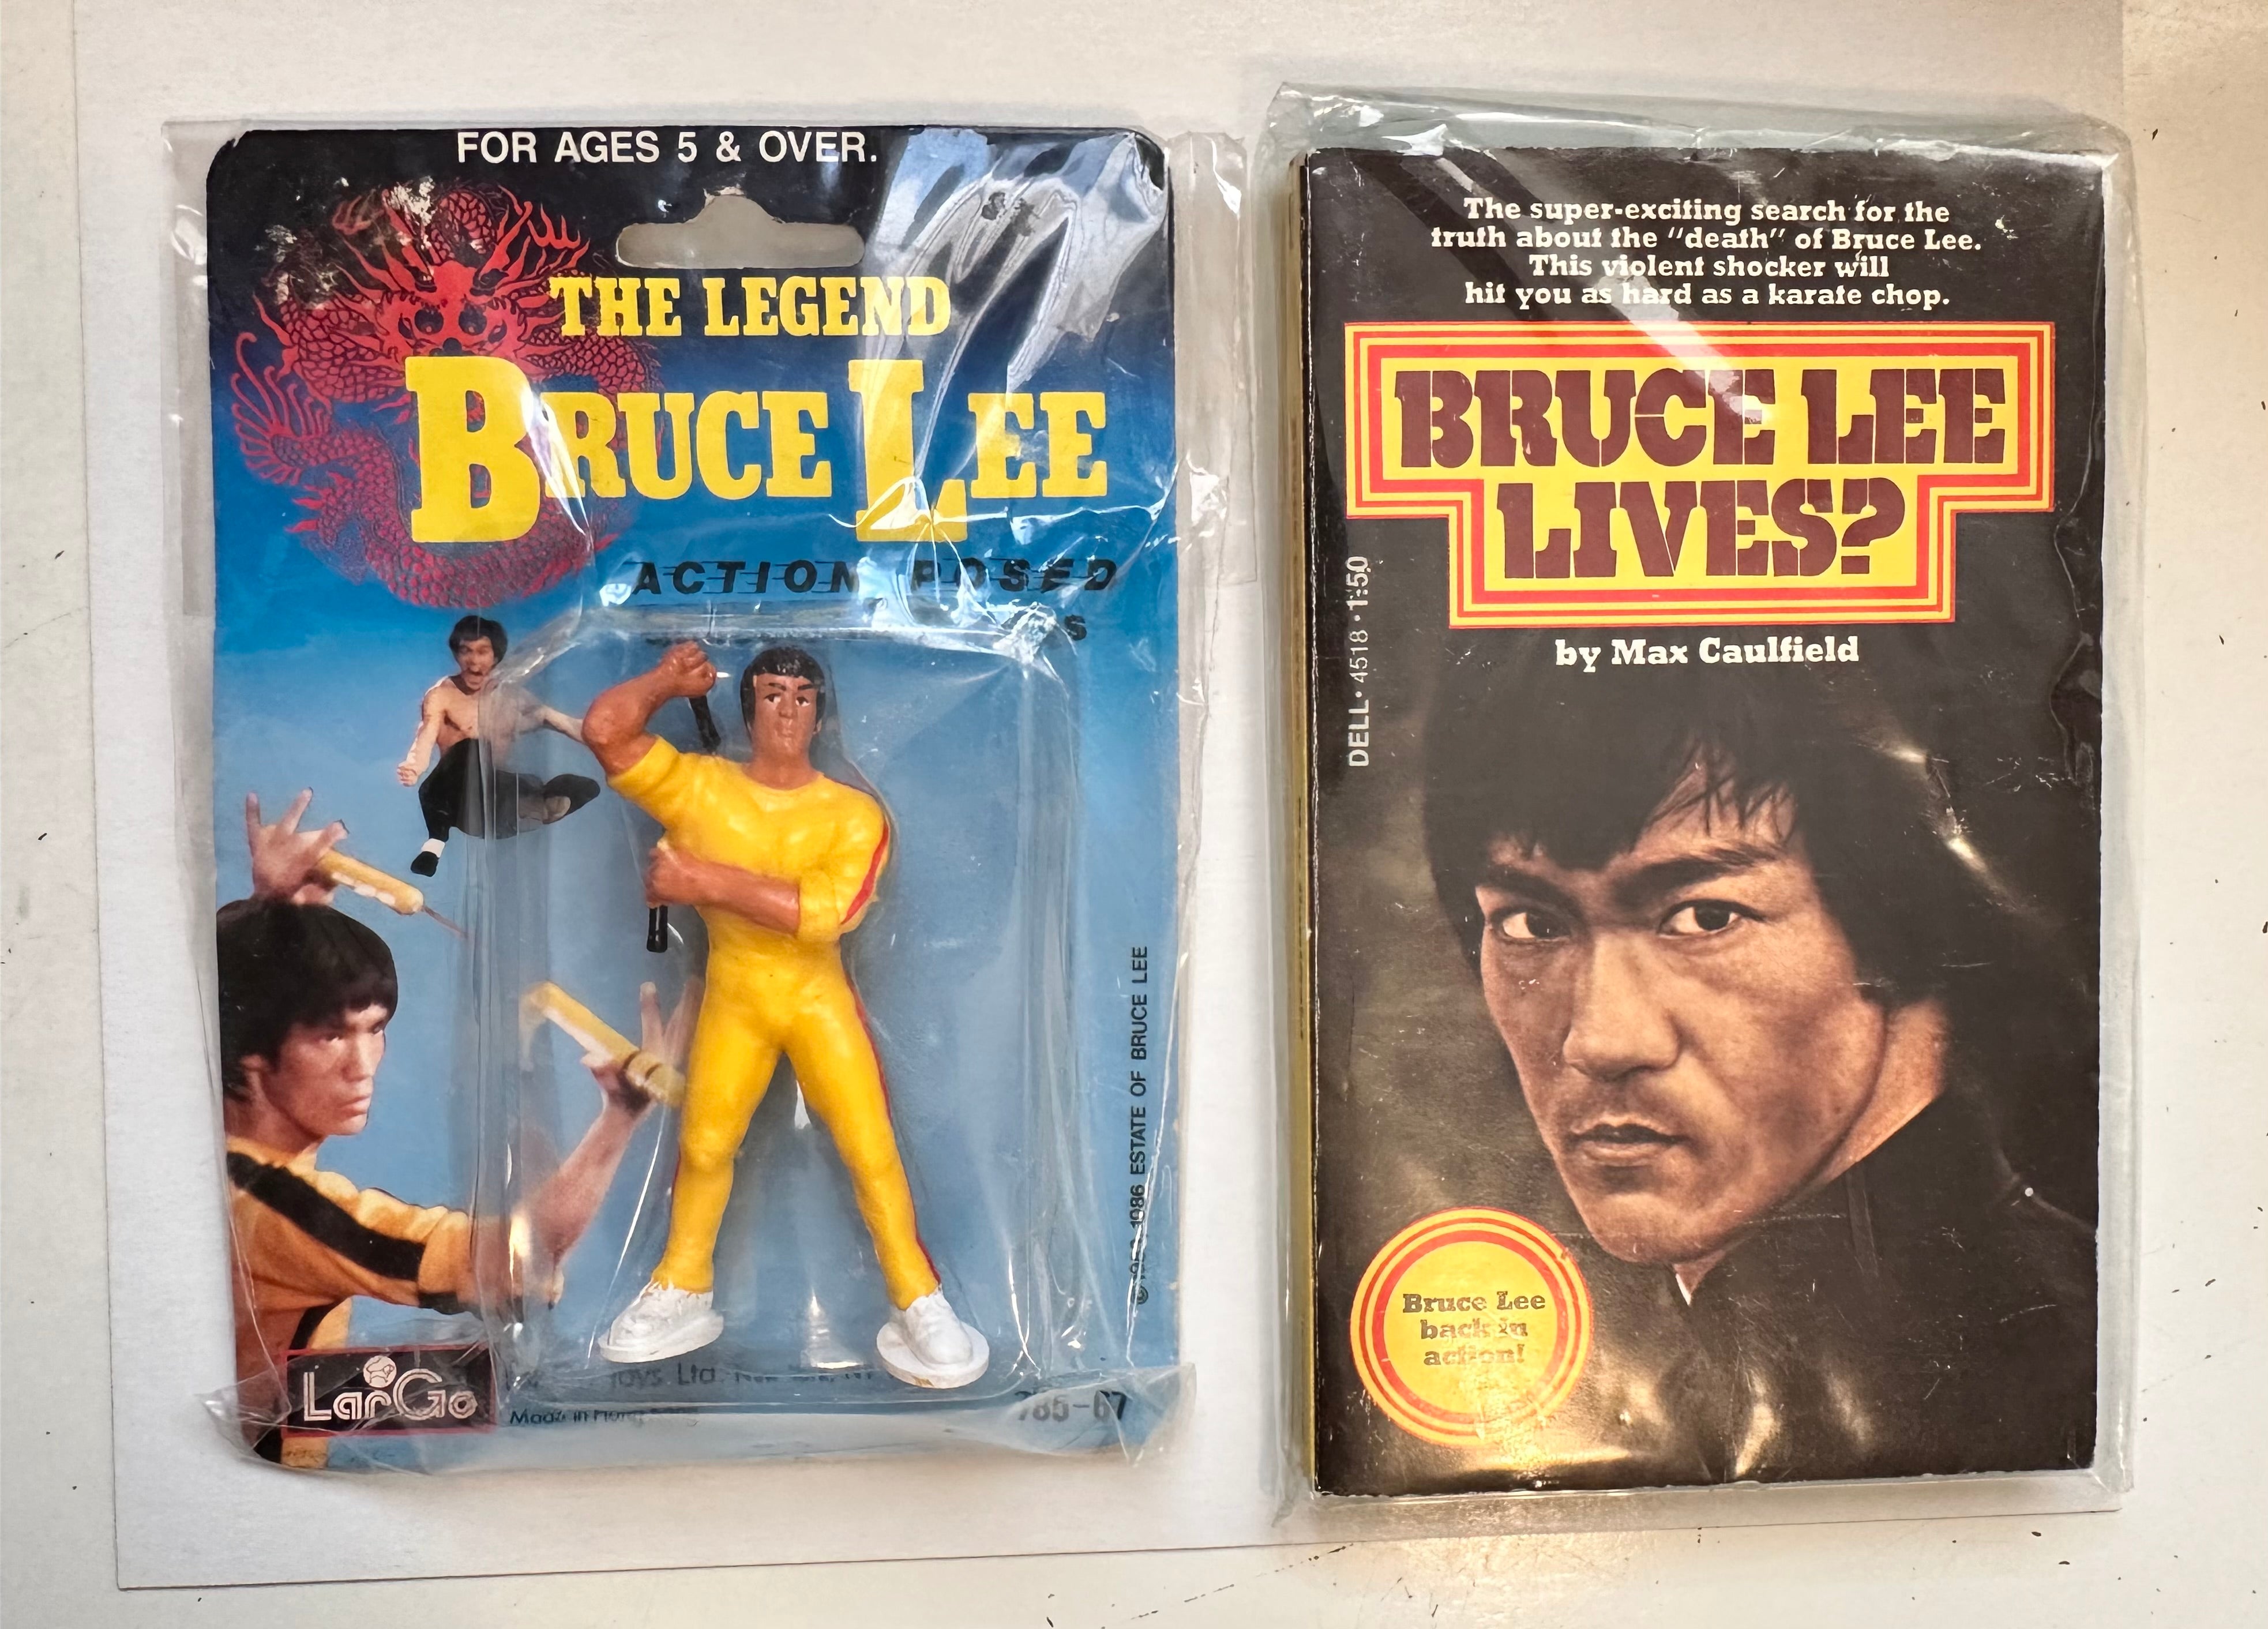 Bruce Lee rare vintage toy and book lot deal